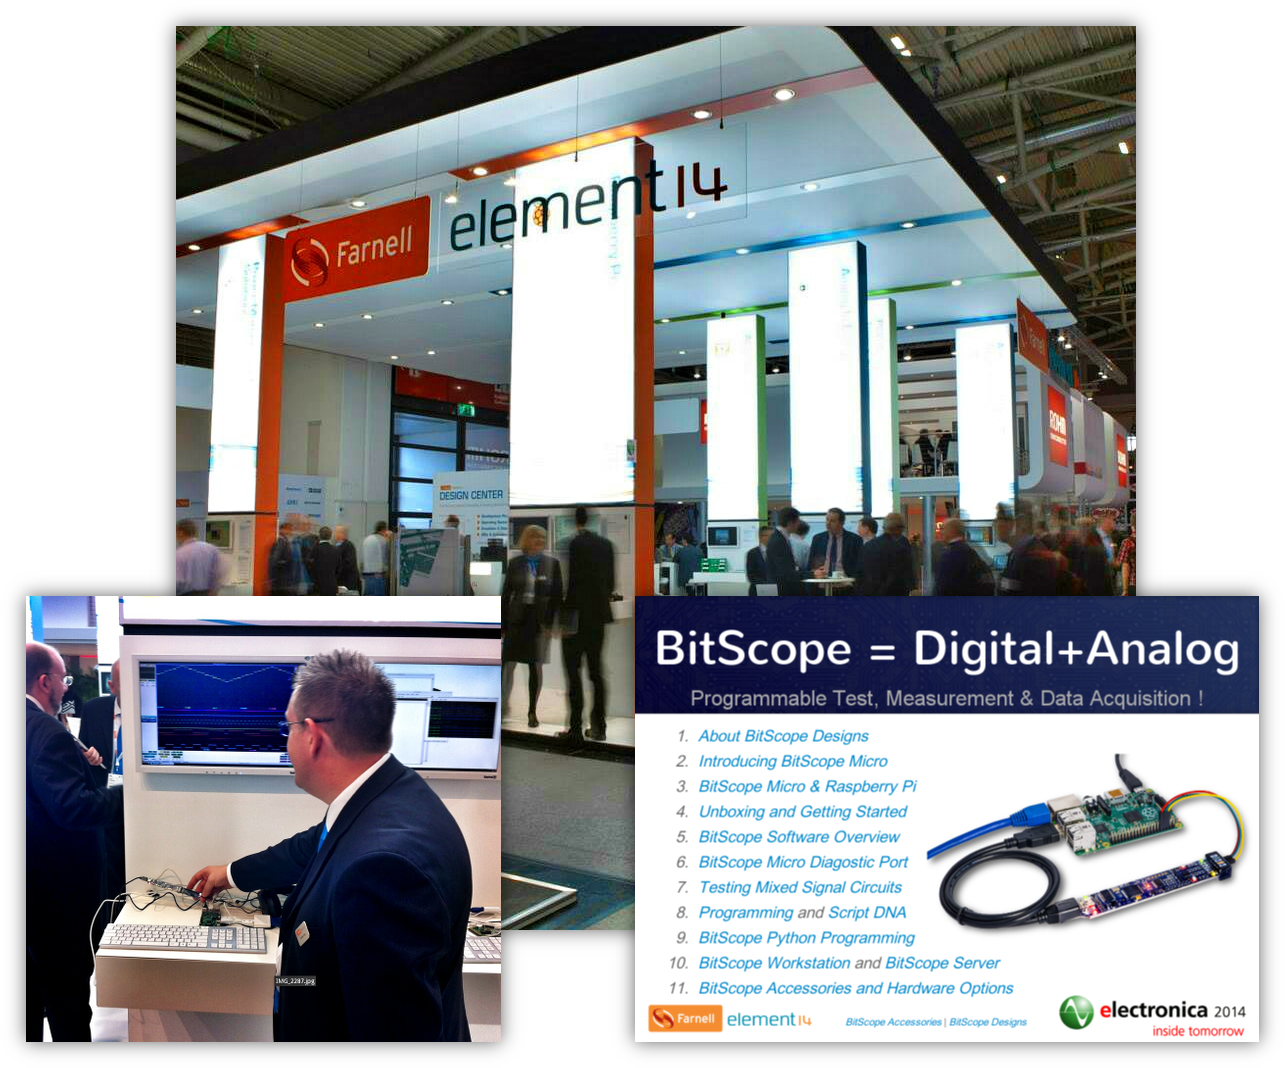 BitScope Micro at electronica with Farnell element14